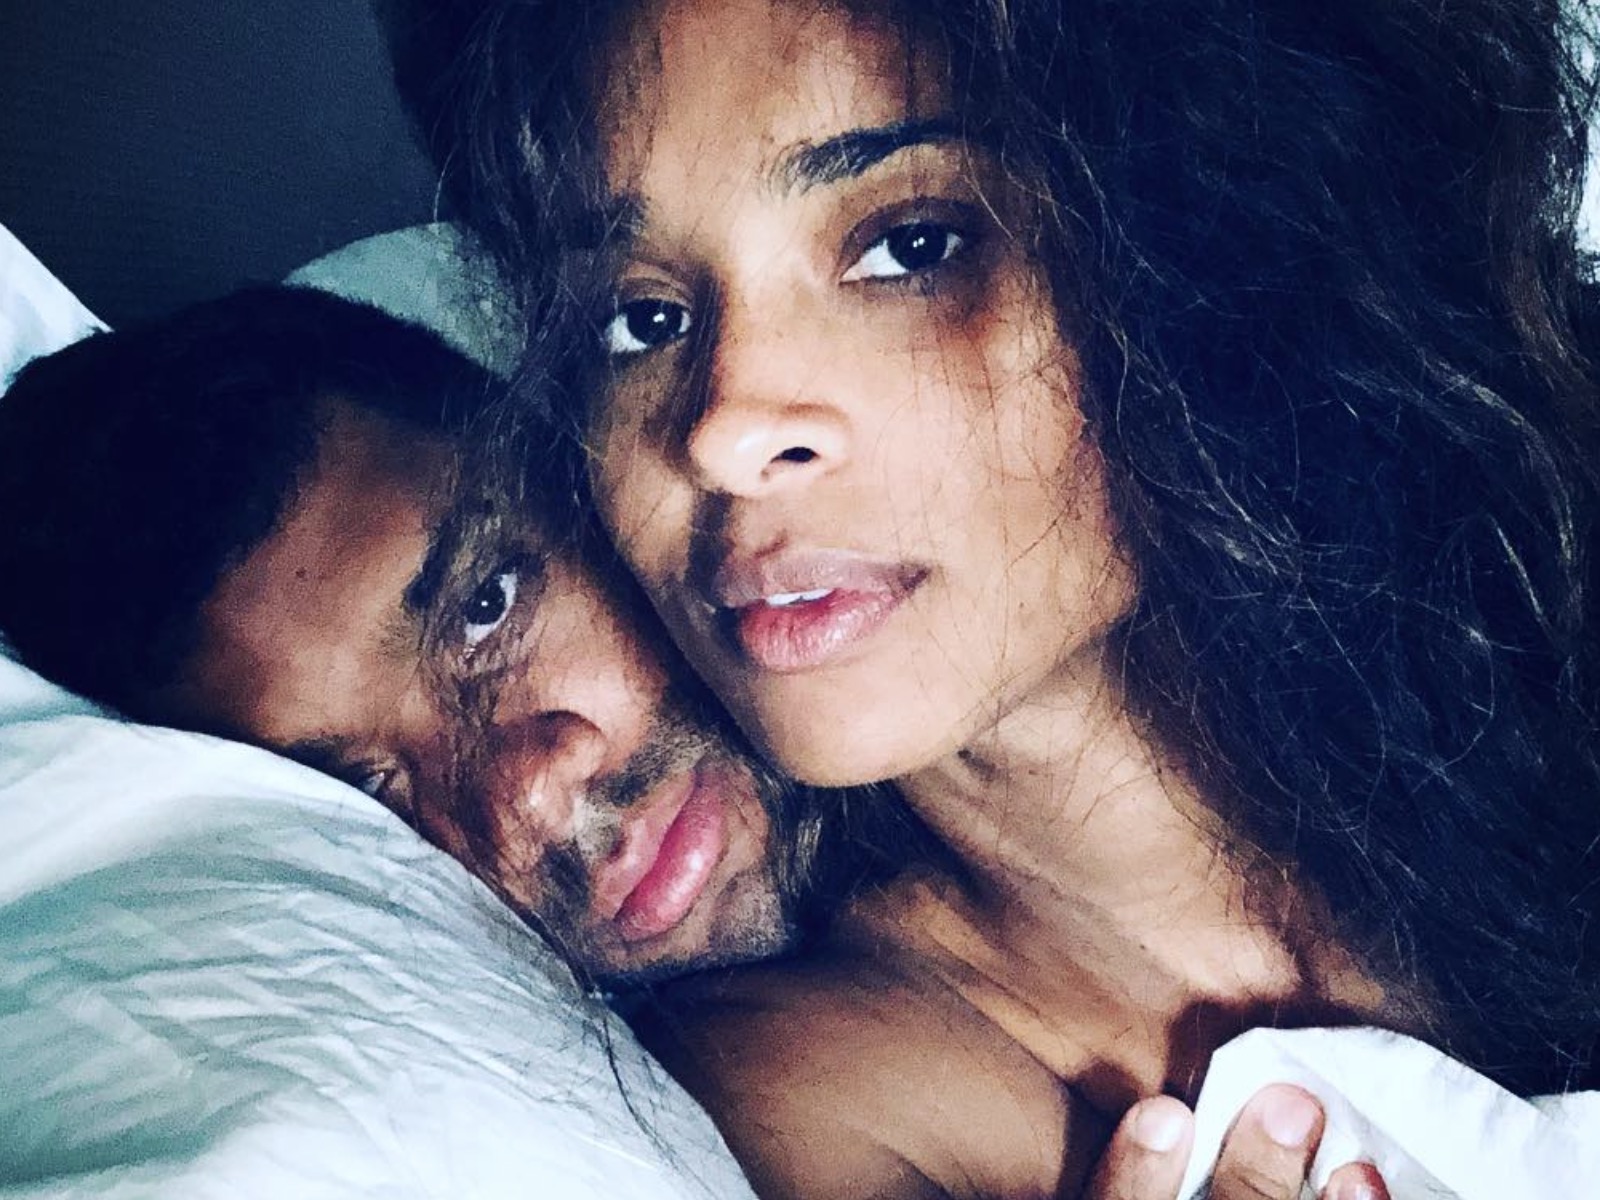 Russell Wilson & Ciara Cement Their Bond Amid Any Future Shade W/ Bedroom Pic1600 x 1200